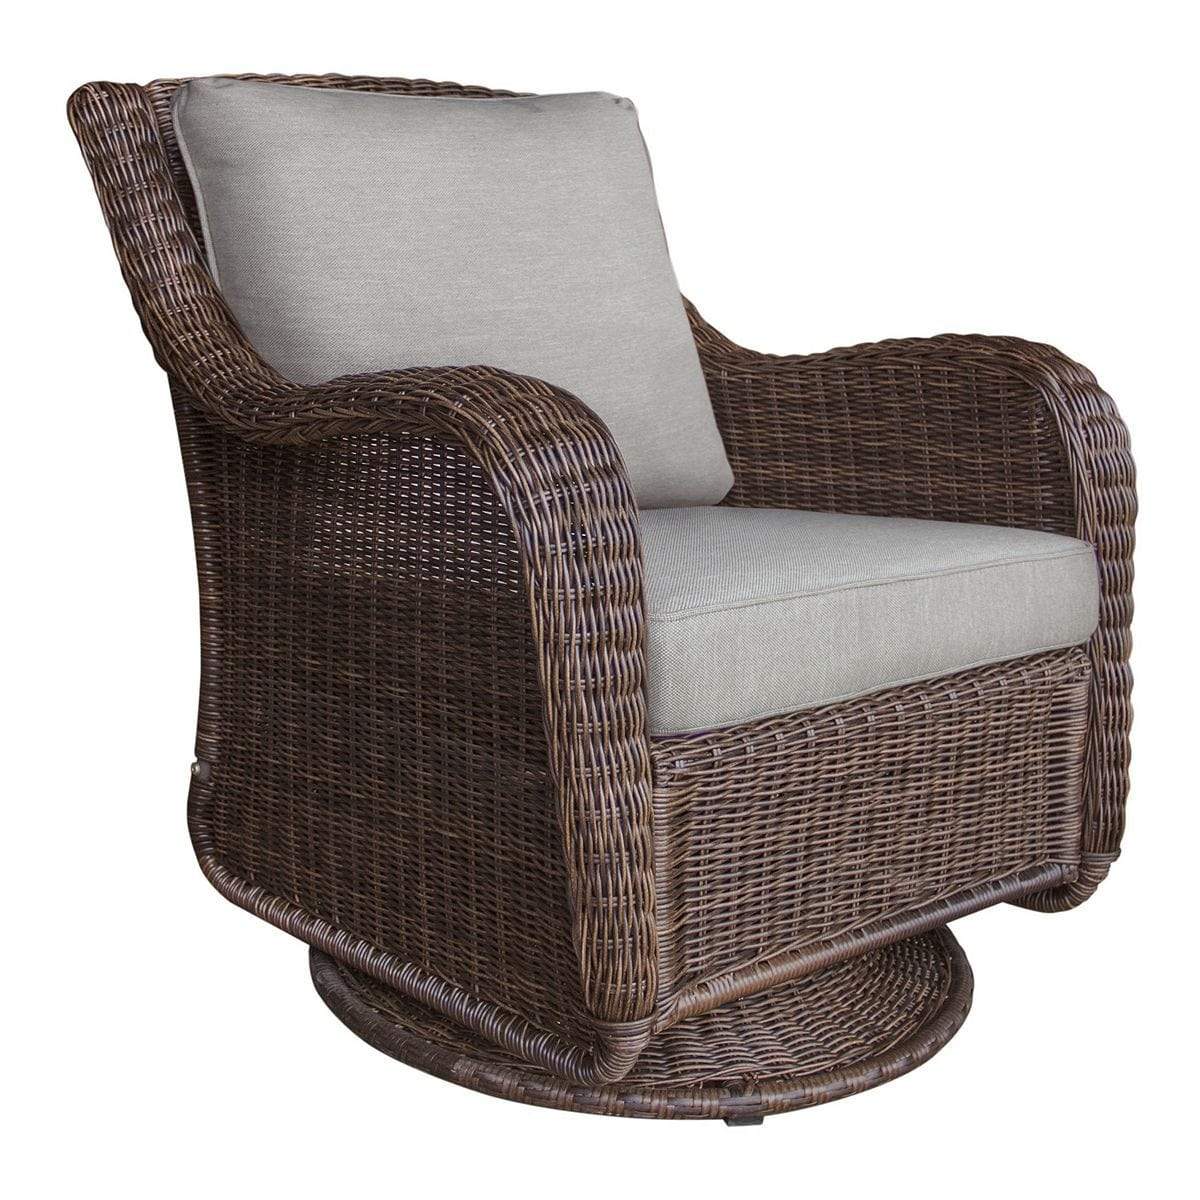 SONOMA GOODS FOR LIFE™ Furniture Brown - Grey SONOMA GOODS FOR LIFE™ - Presidio Swivel Wicker Chair